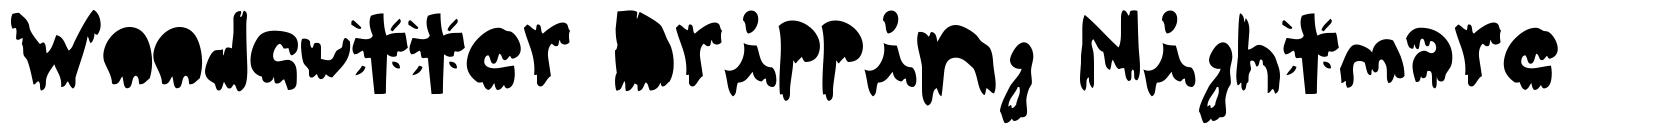 Woodcutter Dripping Nightmare font